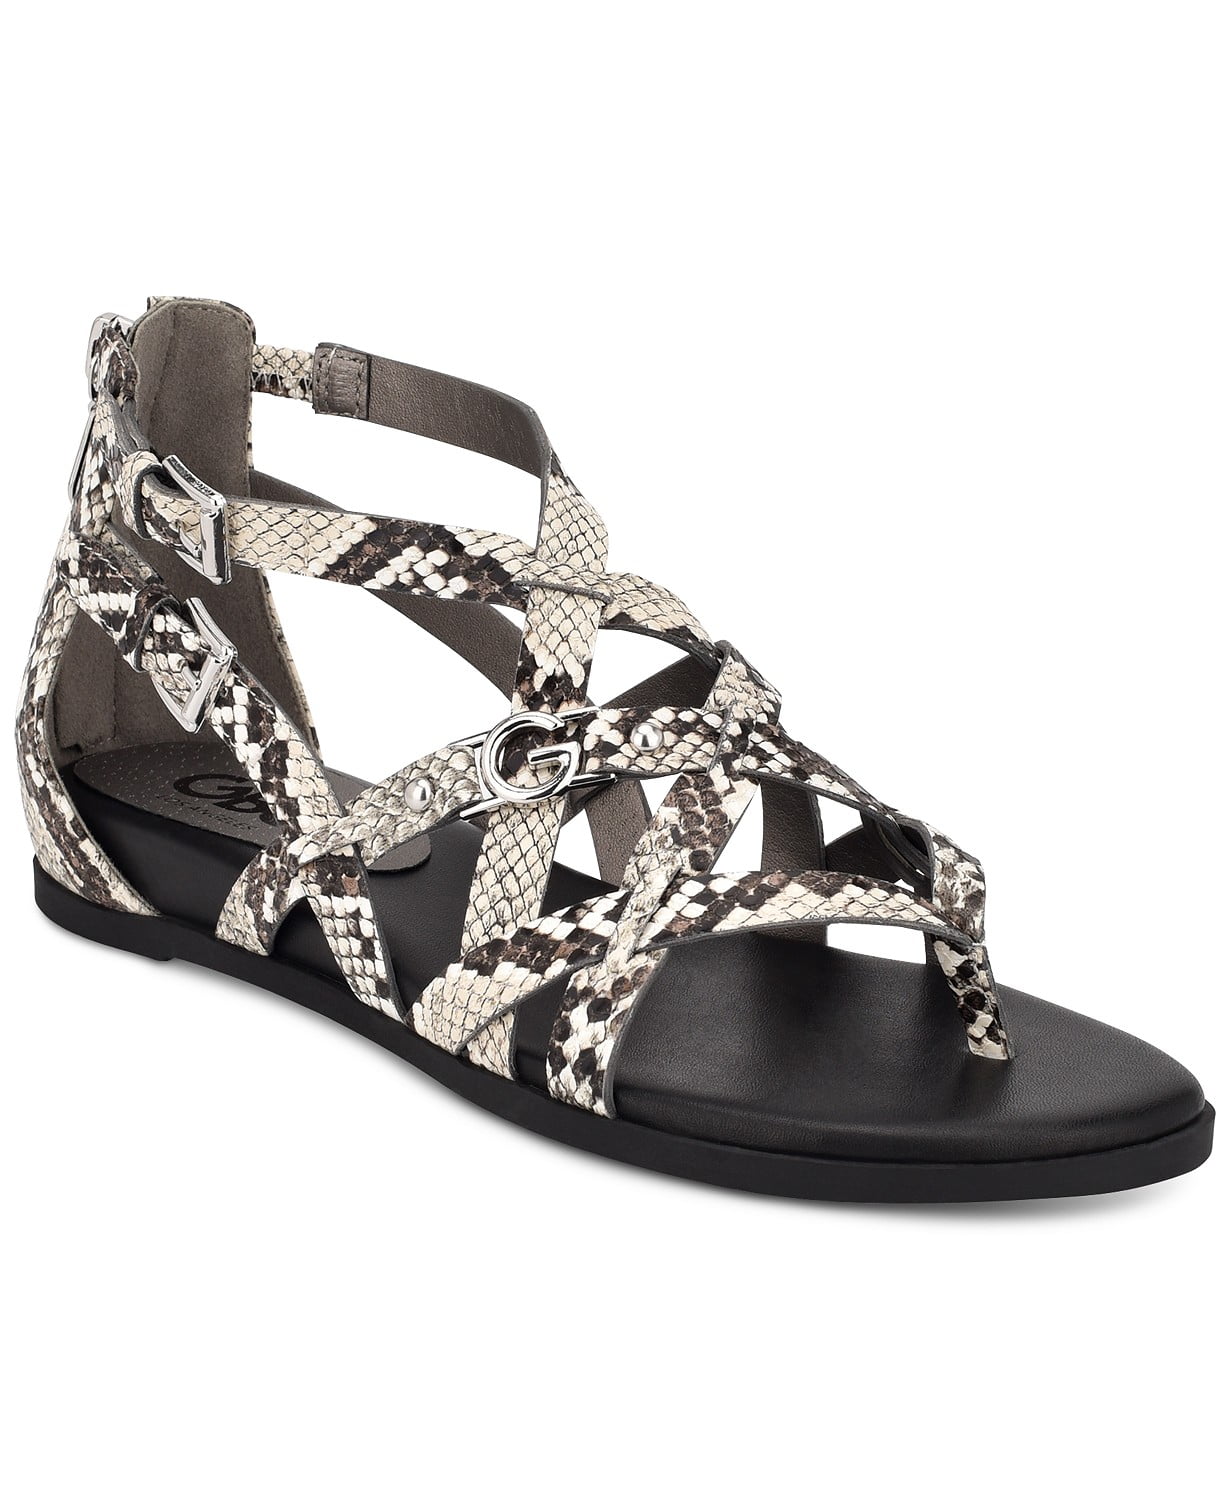 www.couturepoint.com-gbg-los-angeles-womens-python-print-cobell-strappy-gladiator-sandals